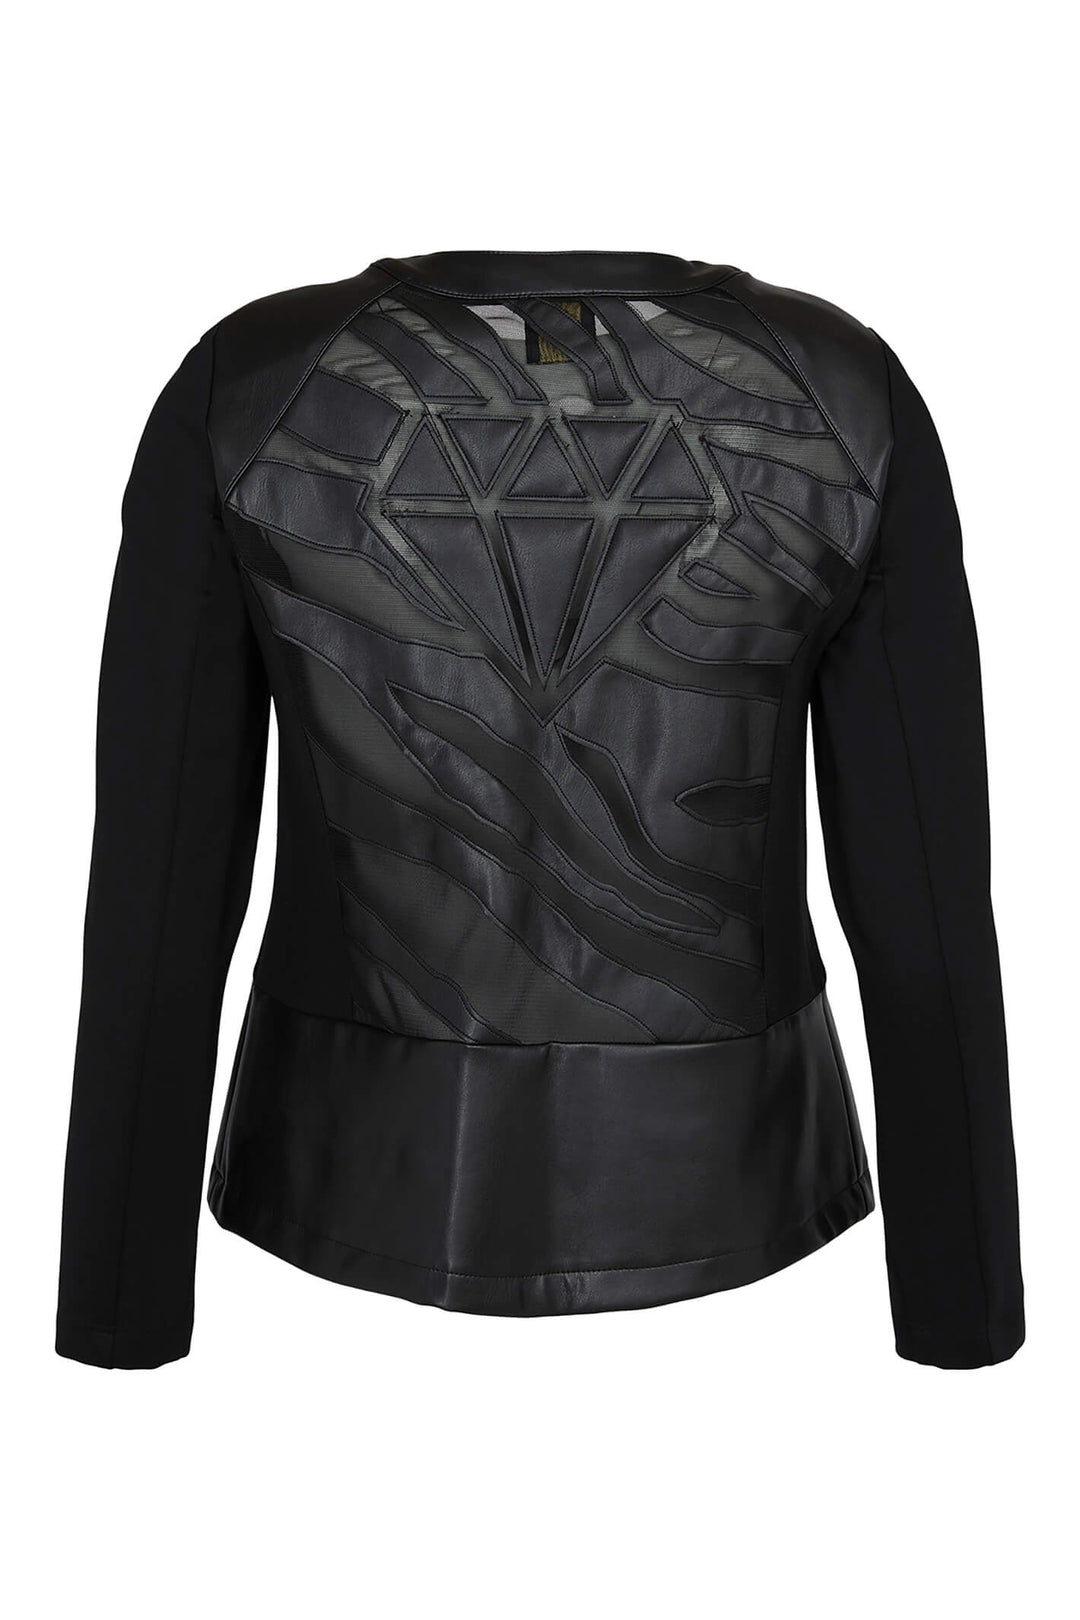 Icona 67110 Black Zip Front Jacket - Experience Boutique